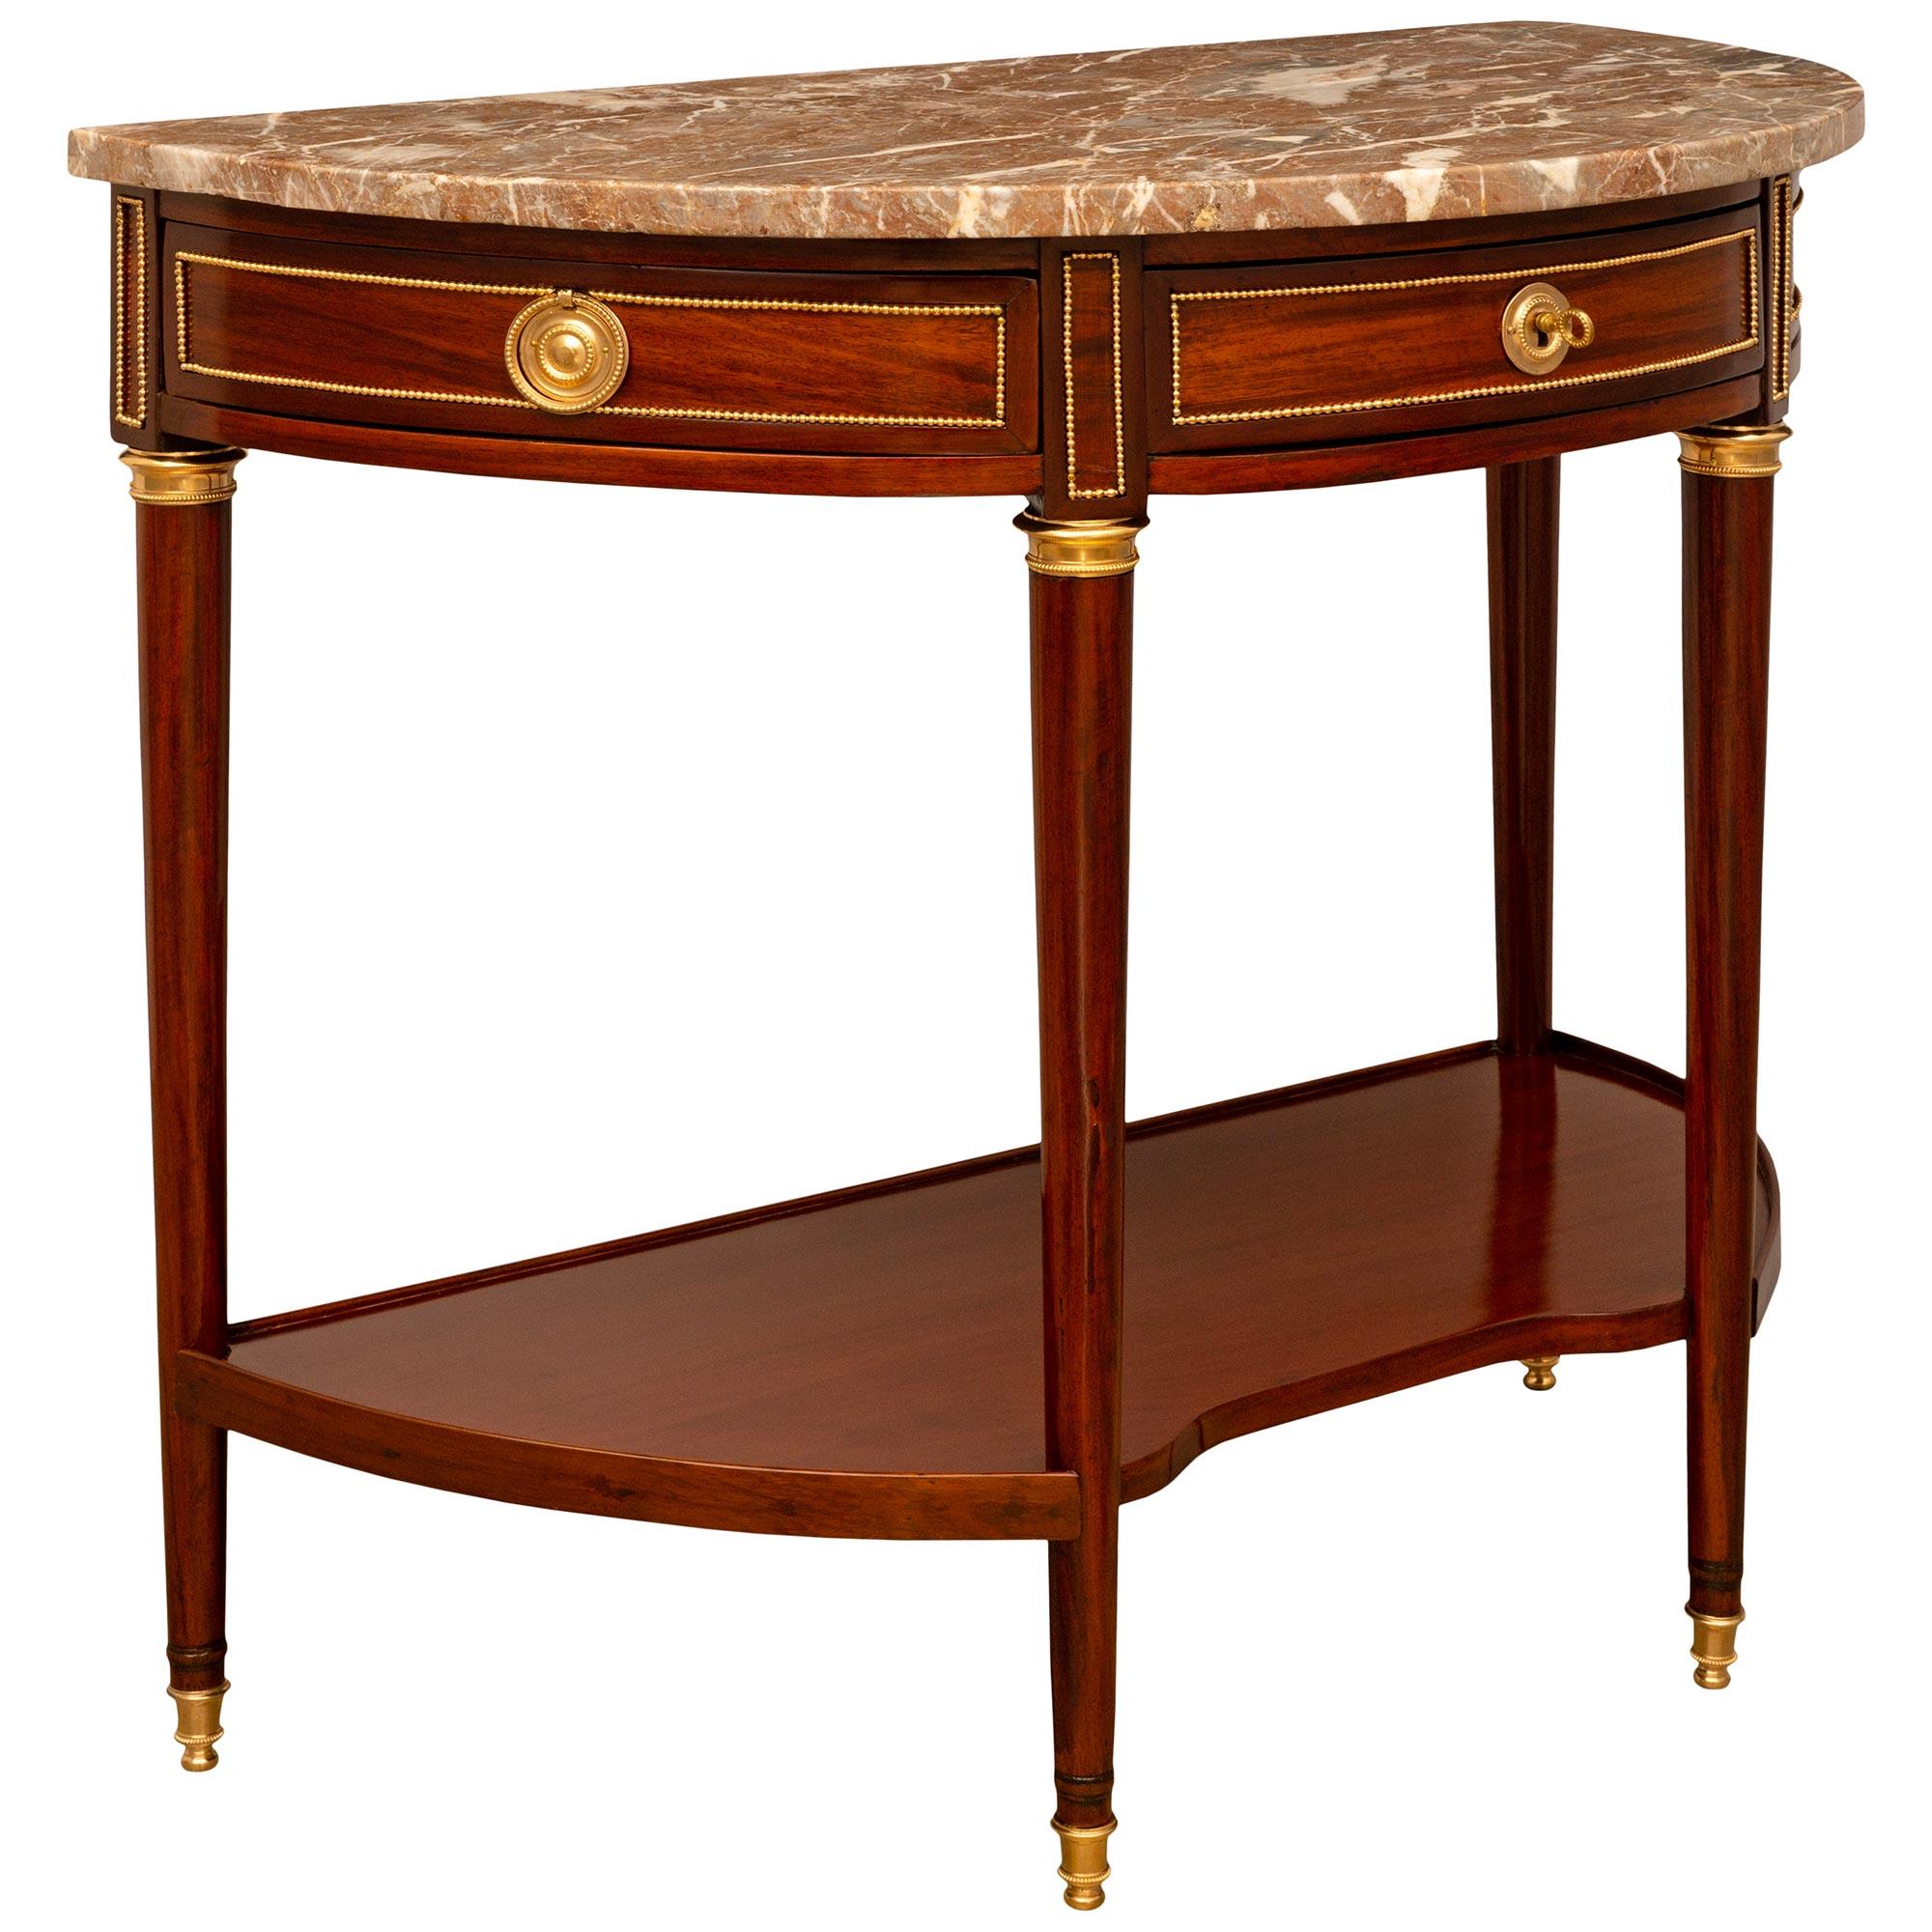 French 18th Century Louis XVI Period Ormolu, Mahogany, And Marble Console For Sale 1